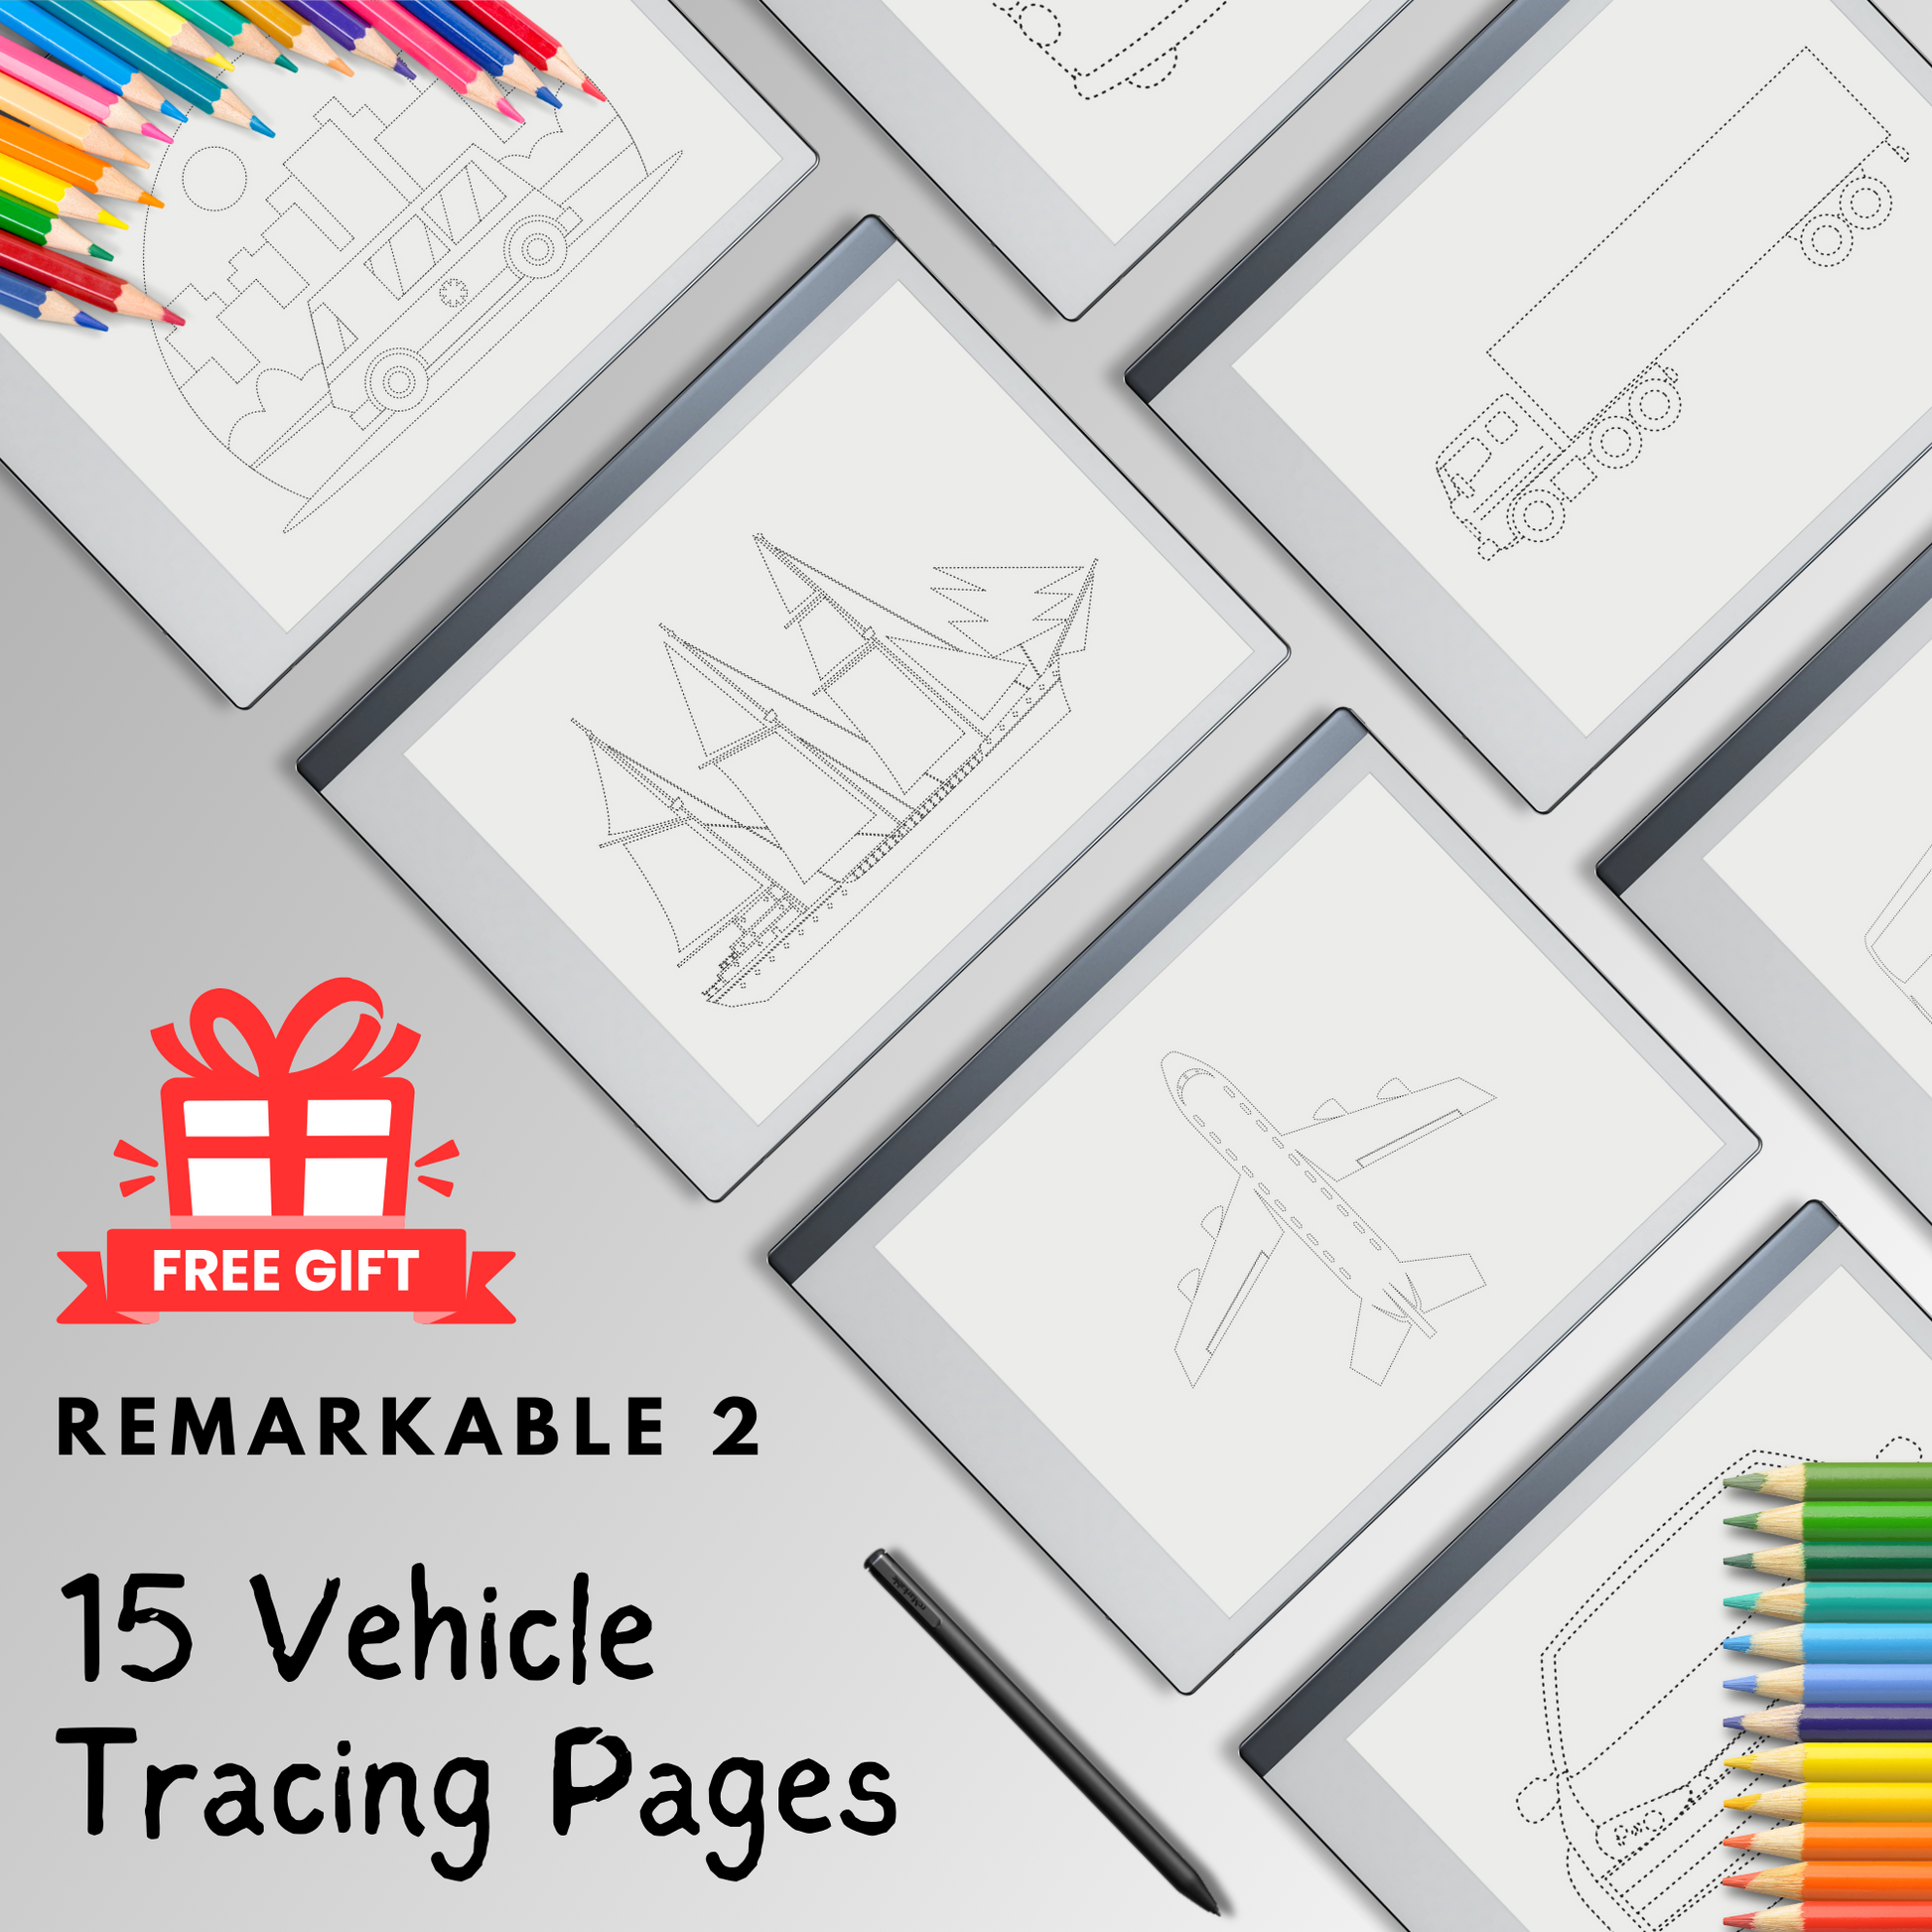 Remarkable 2 Tracing Pages as Gift.